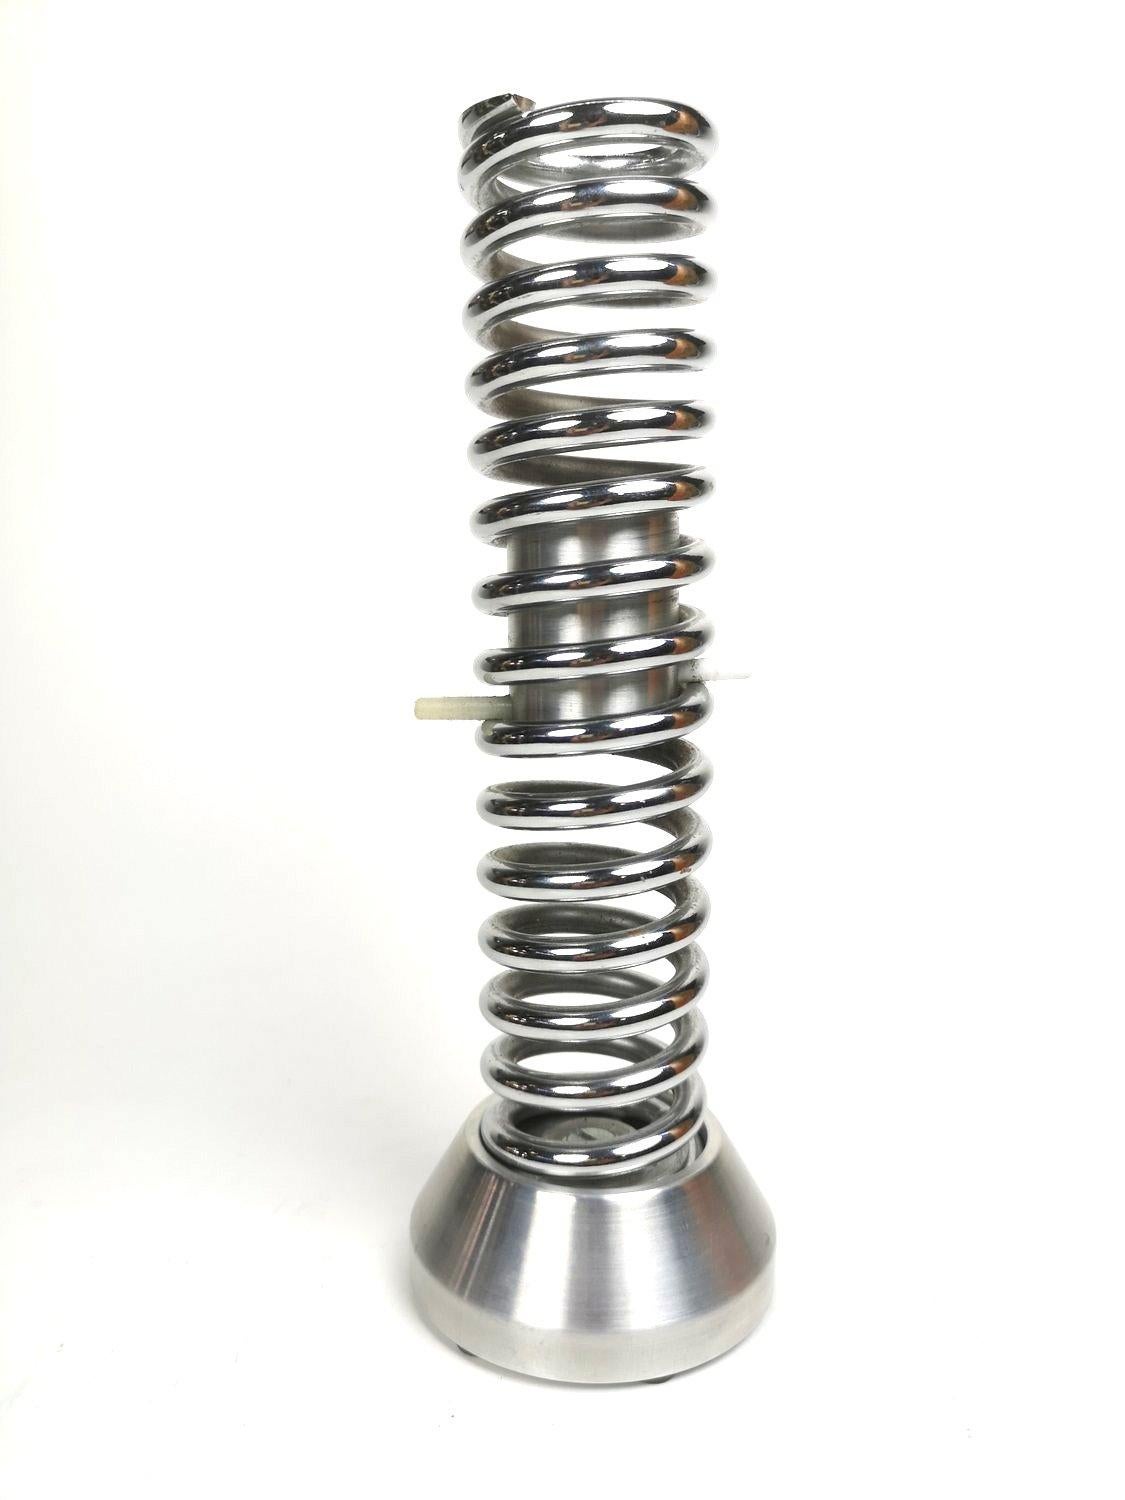 Spring coil shaped designer candelabra. The height is adjustable to the size of the candle that it holds.